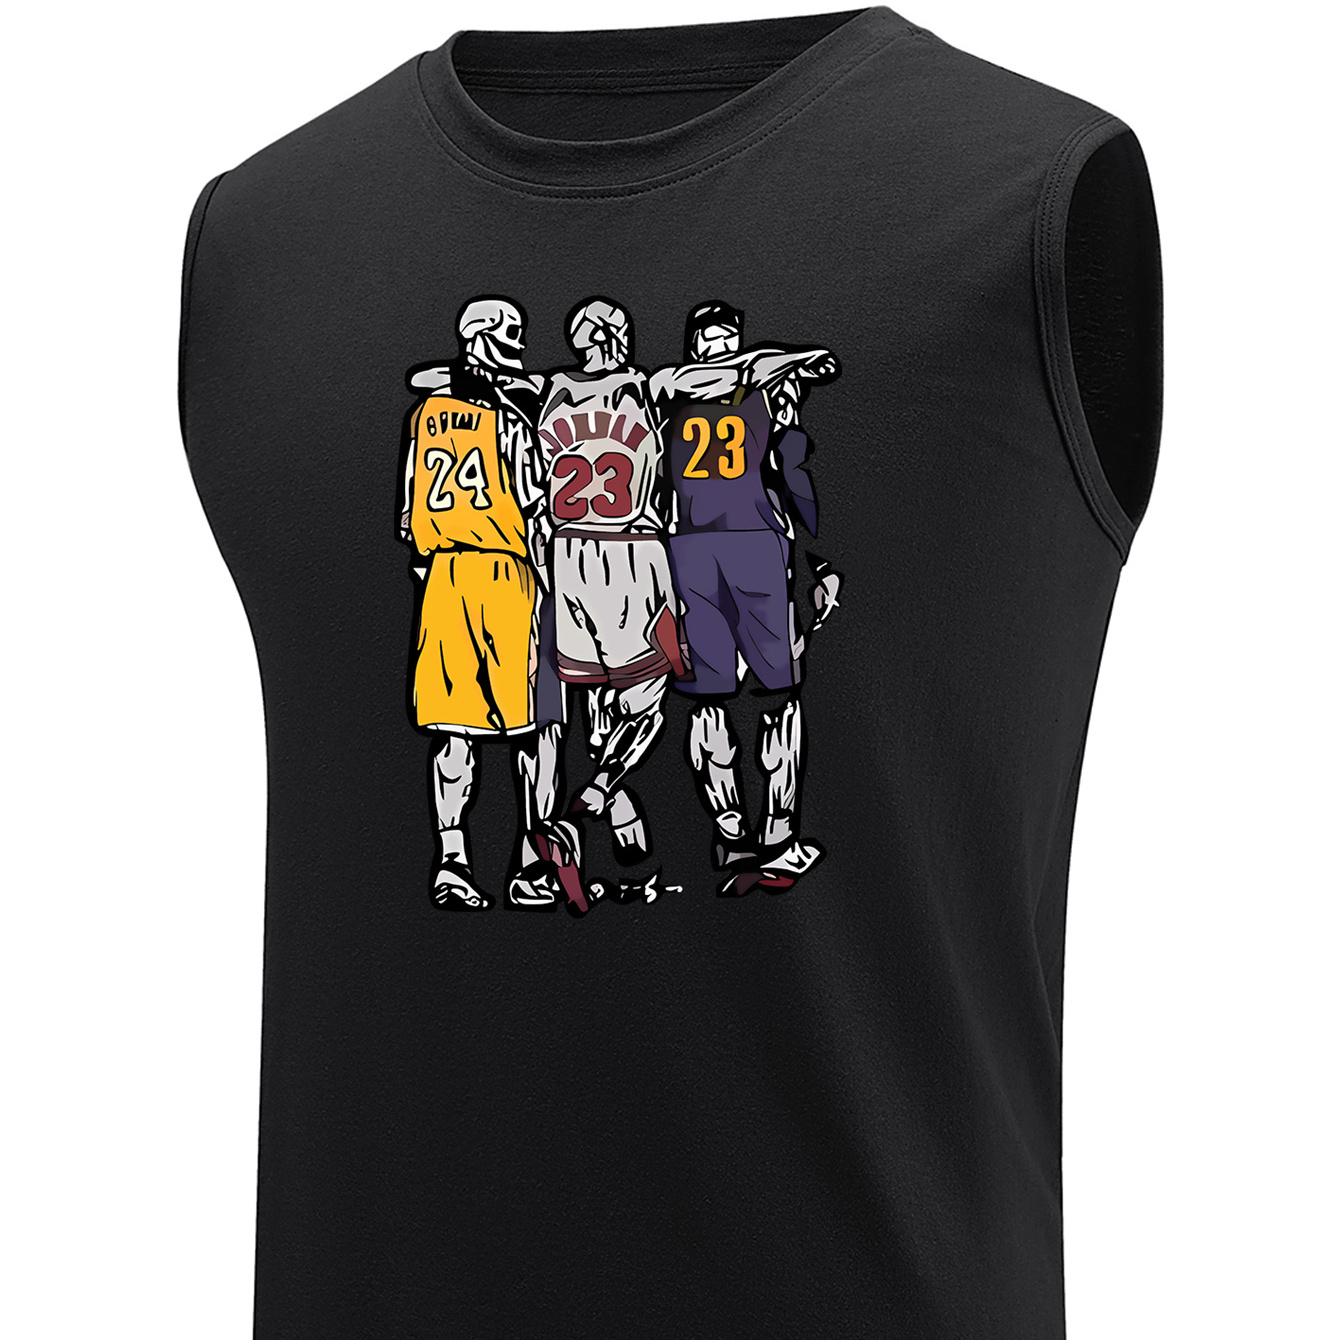 

Plus Size Men's Basketball Player Graphic Print Tank Top For Fitness/sports, Breathable Sweat Absorbing Cotton Comfy Sleeveless Tees